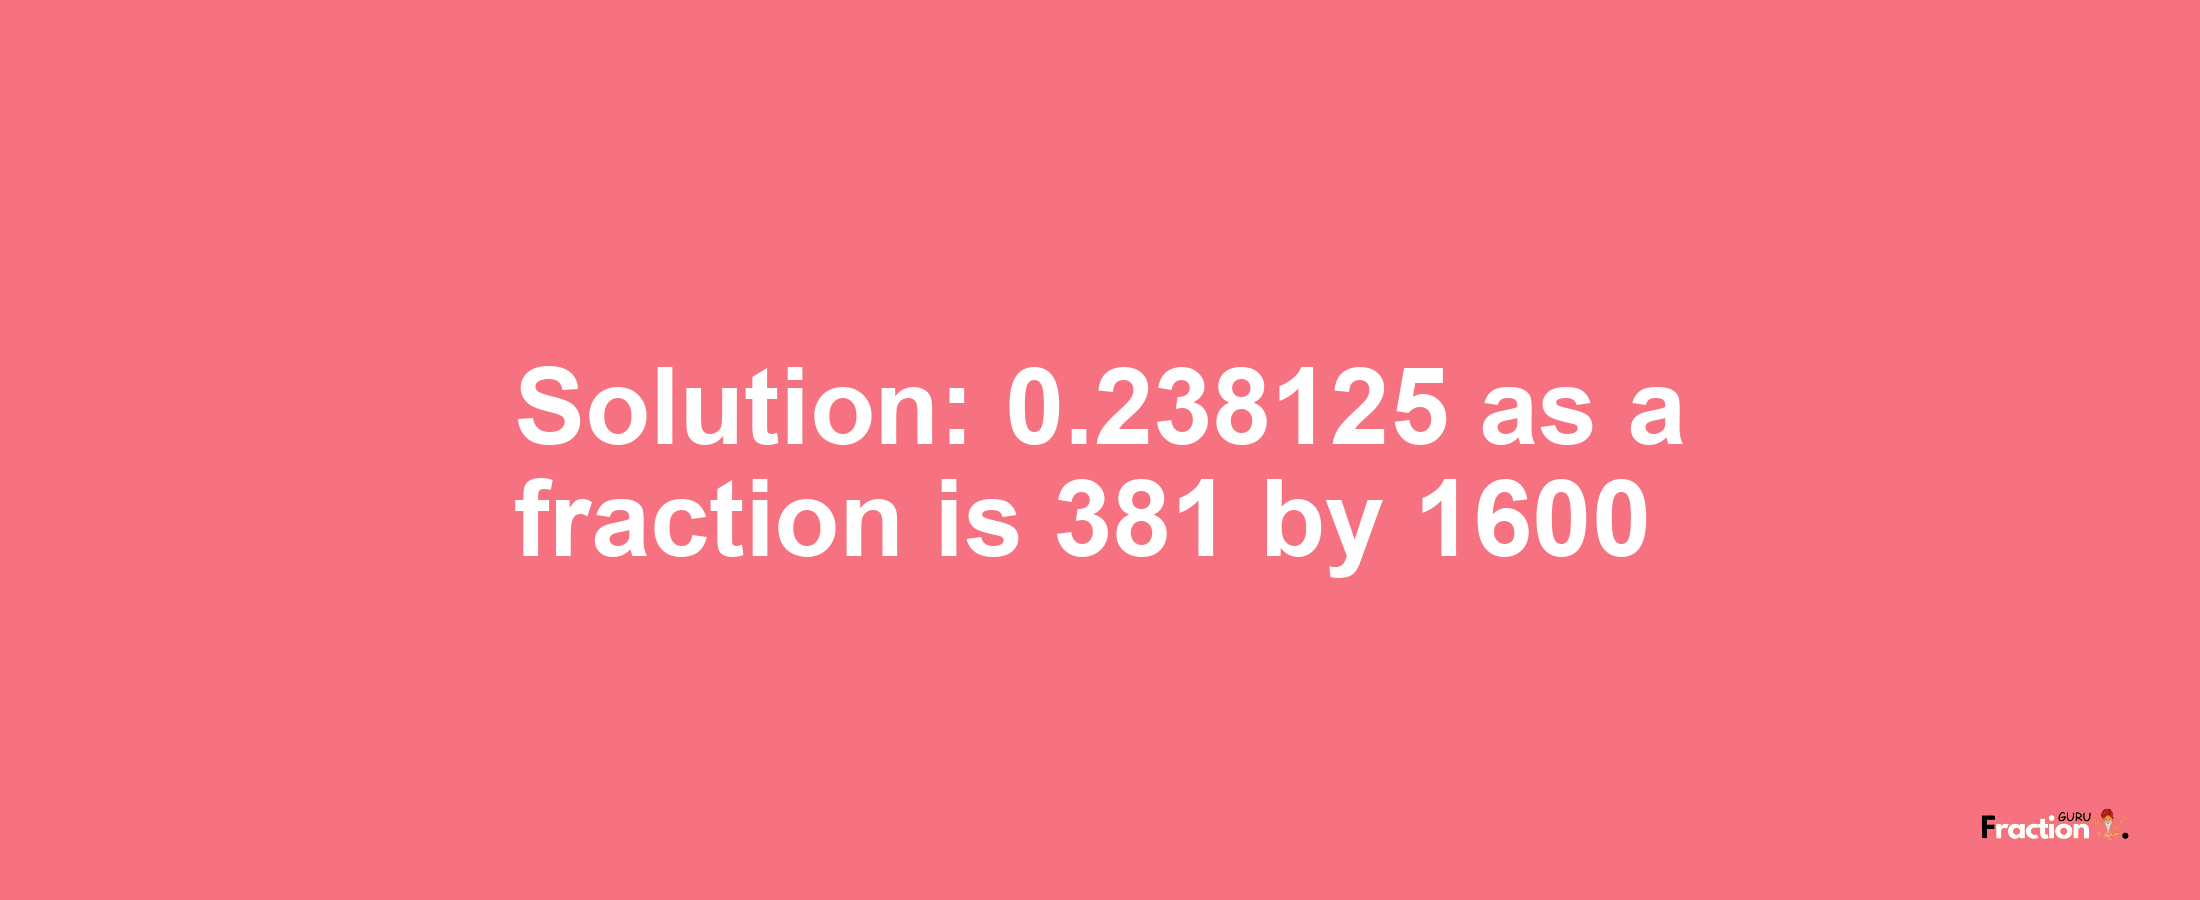 Solution:0.238125 as a fraction is 381/1600